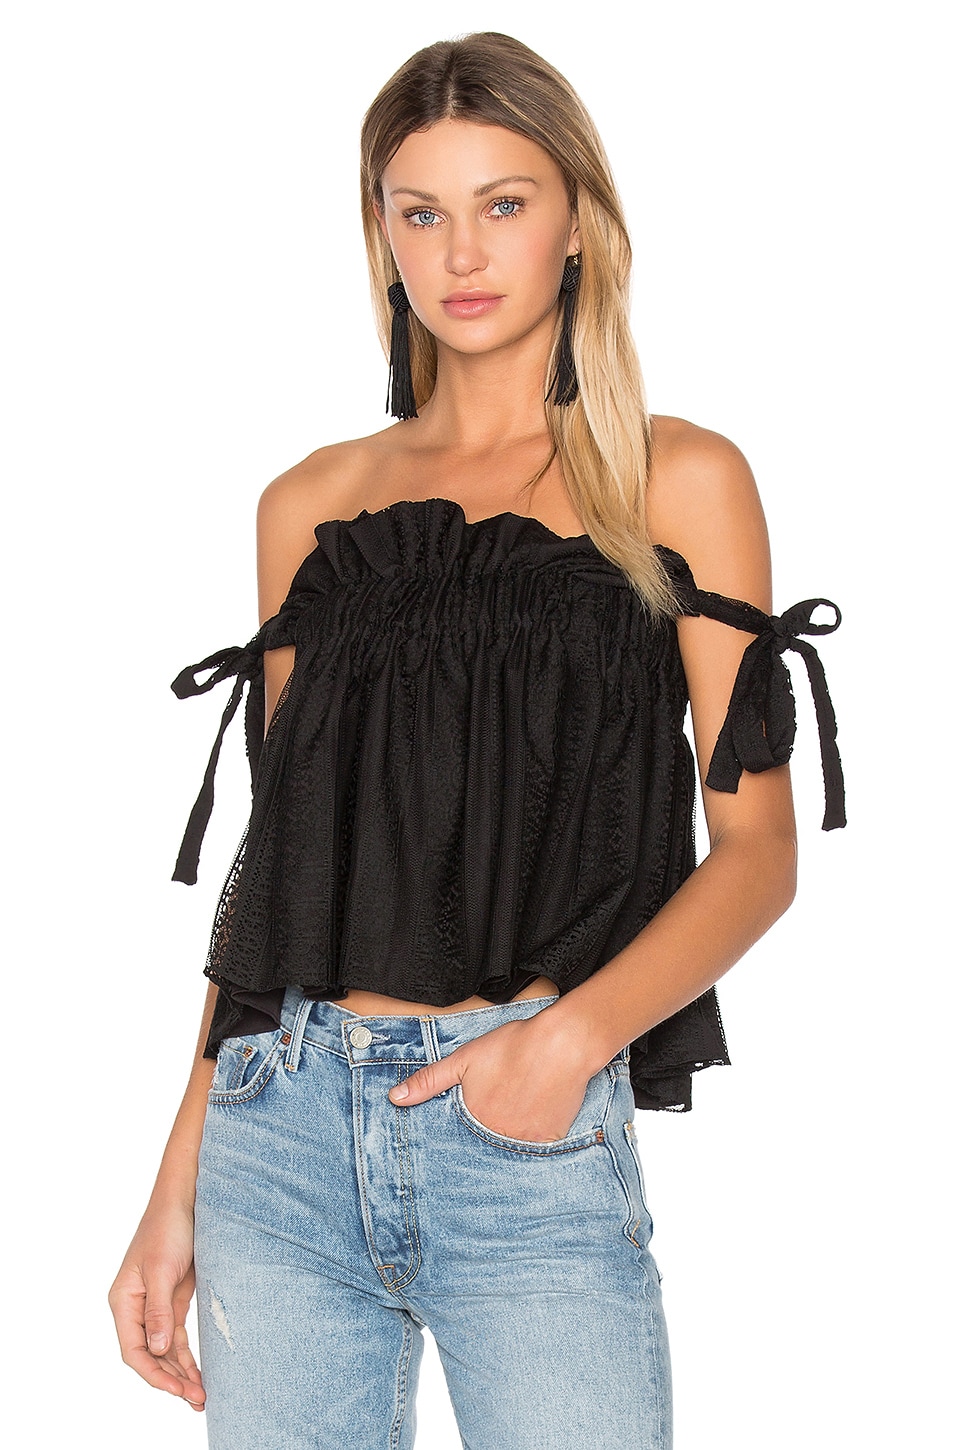 Shona Joy Moliere Ruched Top in Black | REVOLVE